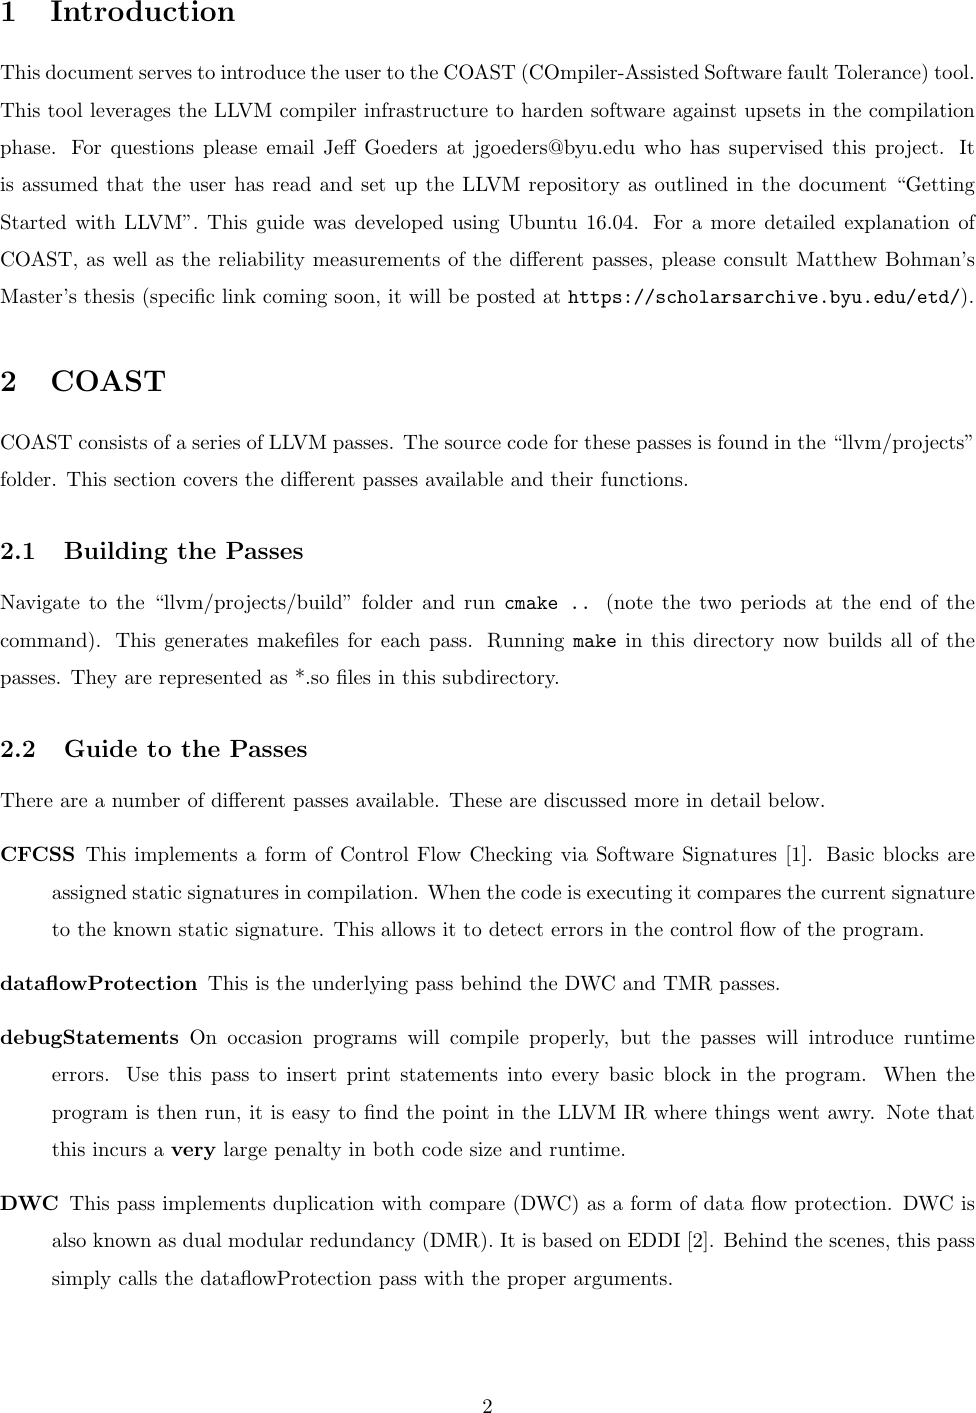 Page 2 of 9 - Coast-user-guide